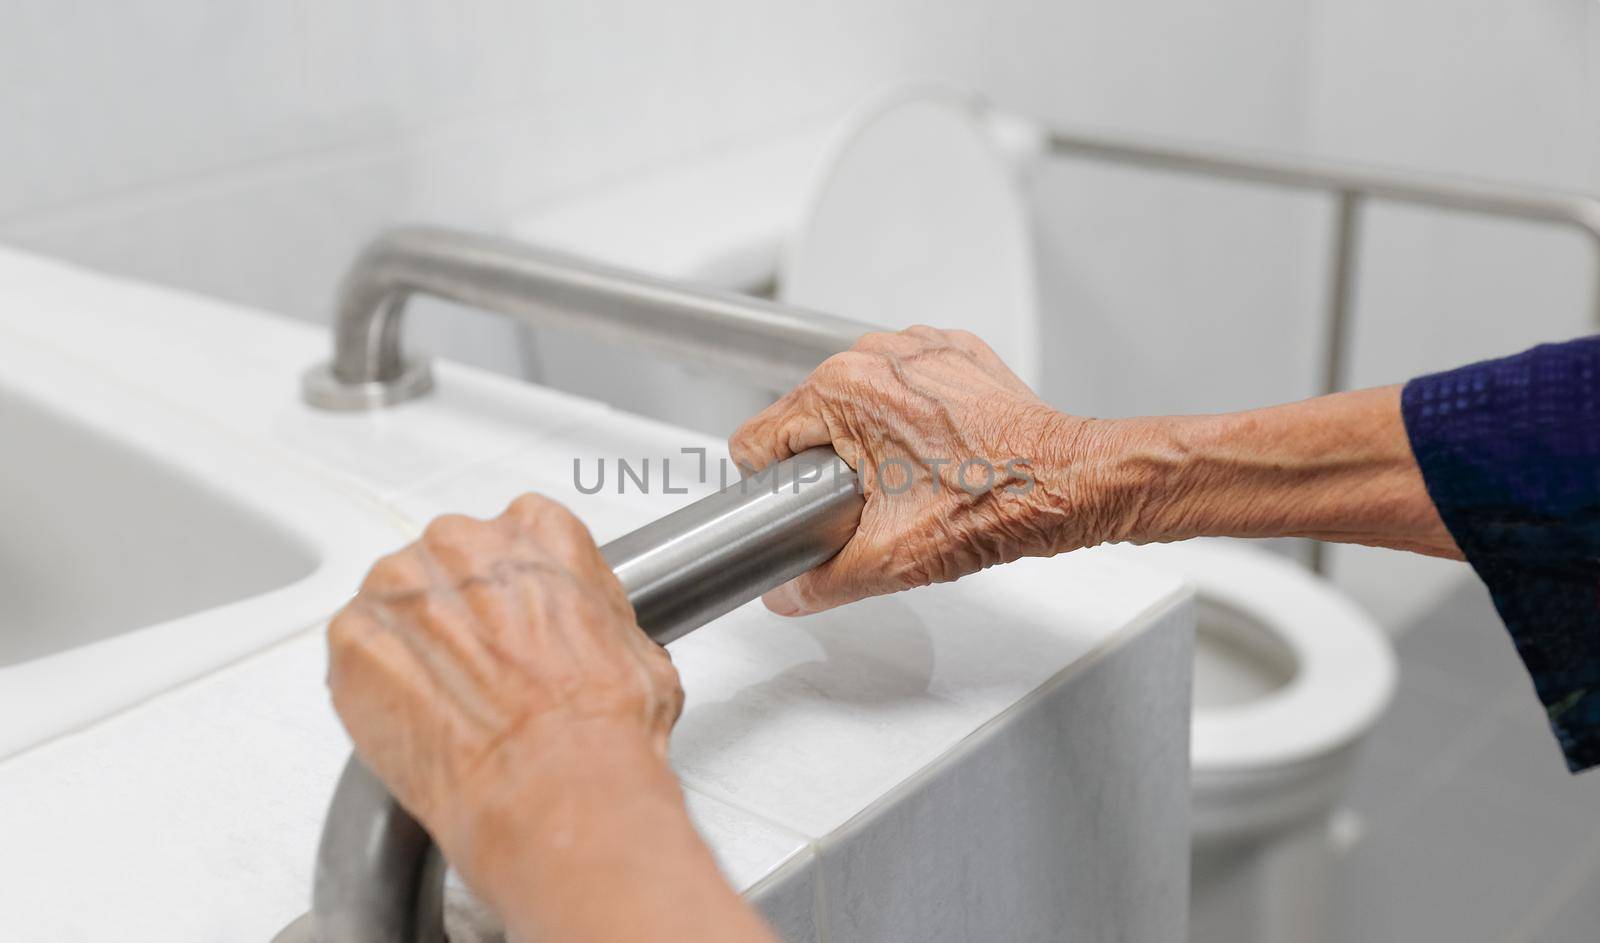 Elderly woman holding on handrail in bathroom by toa55